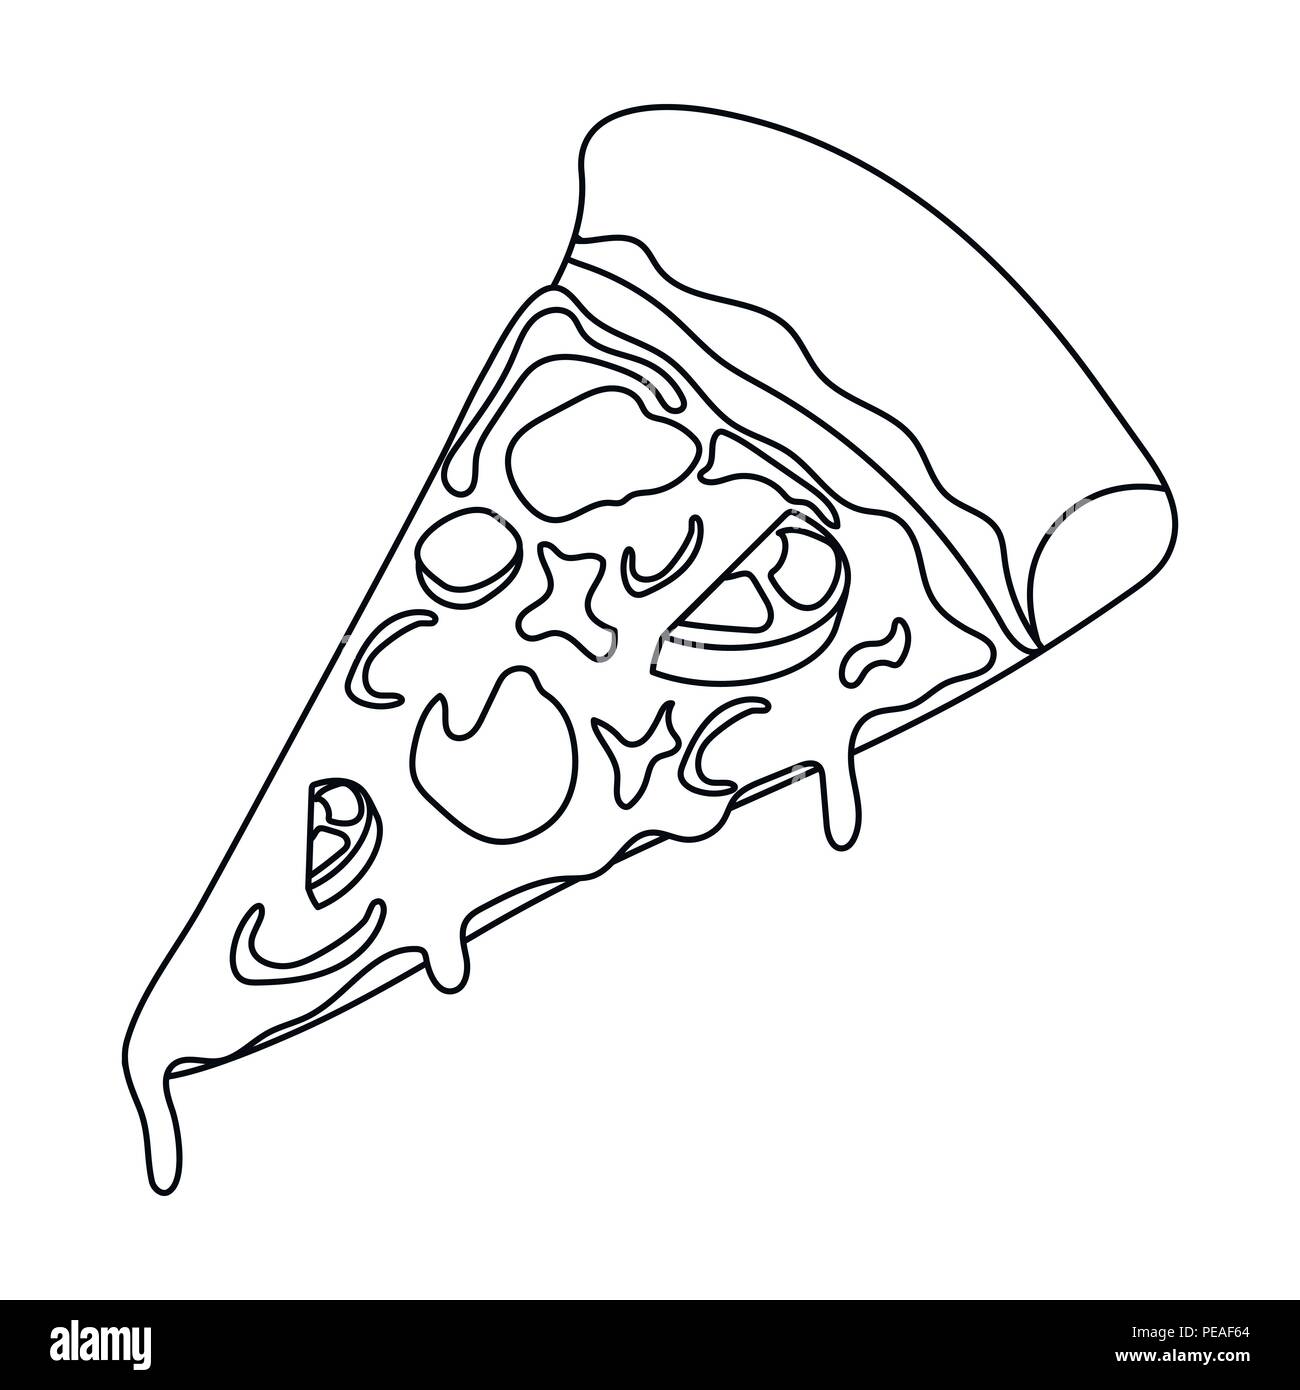 Slice of pizza icon in outline style isolated on white background ...